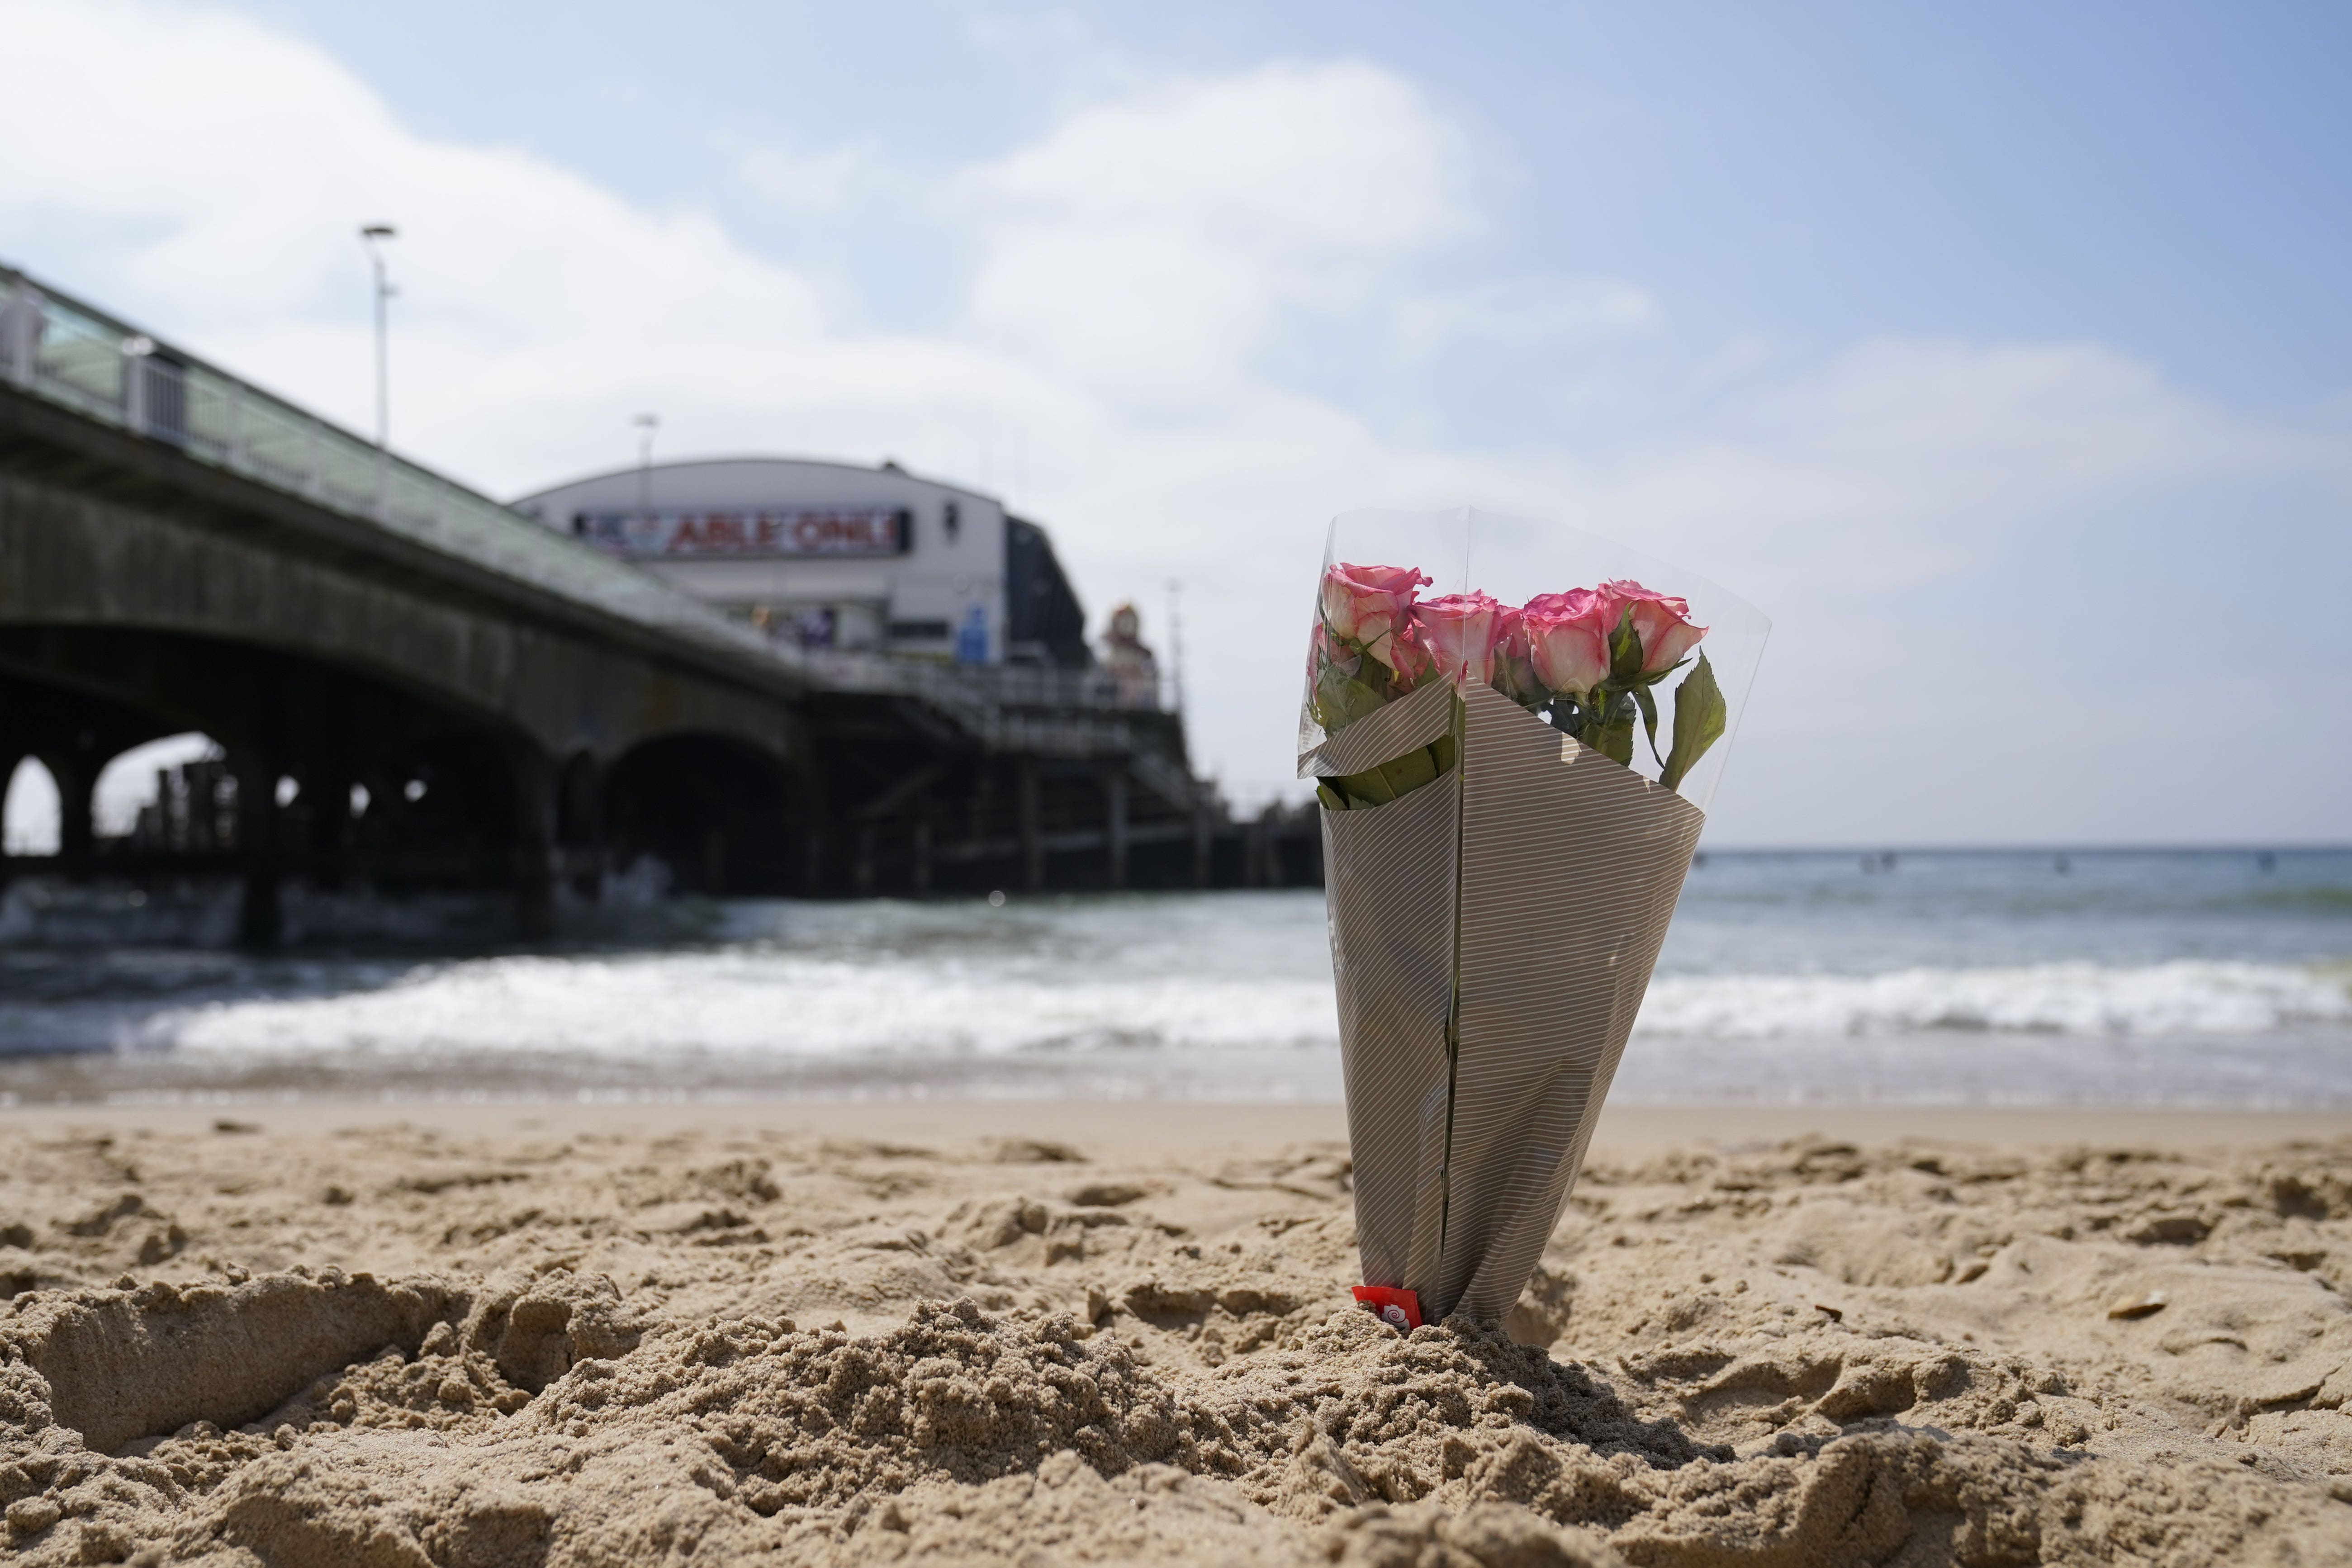 A lone bunch of flowers among the countless holidaymakers serves as the only reminder of the tragic event that took place less than 24 hours ago